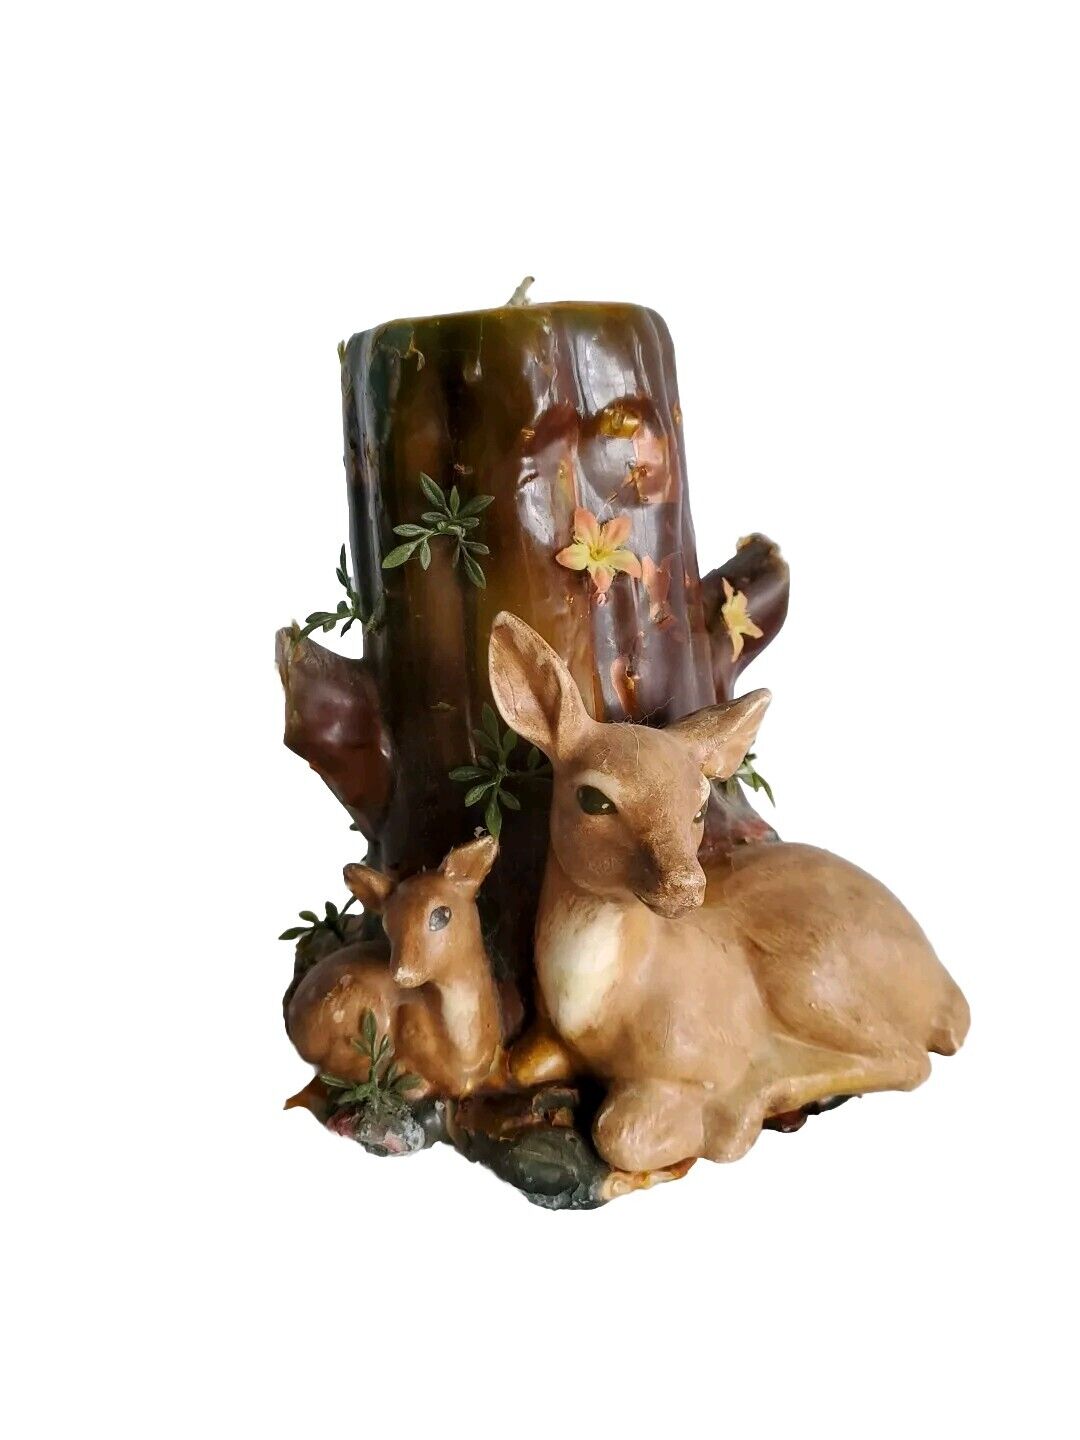 Vtg Wax Sculpted Candle Tree Stump With Deer & Foliage MCM Kitschy Cabin Hippie